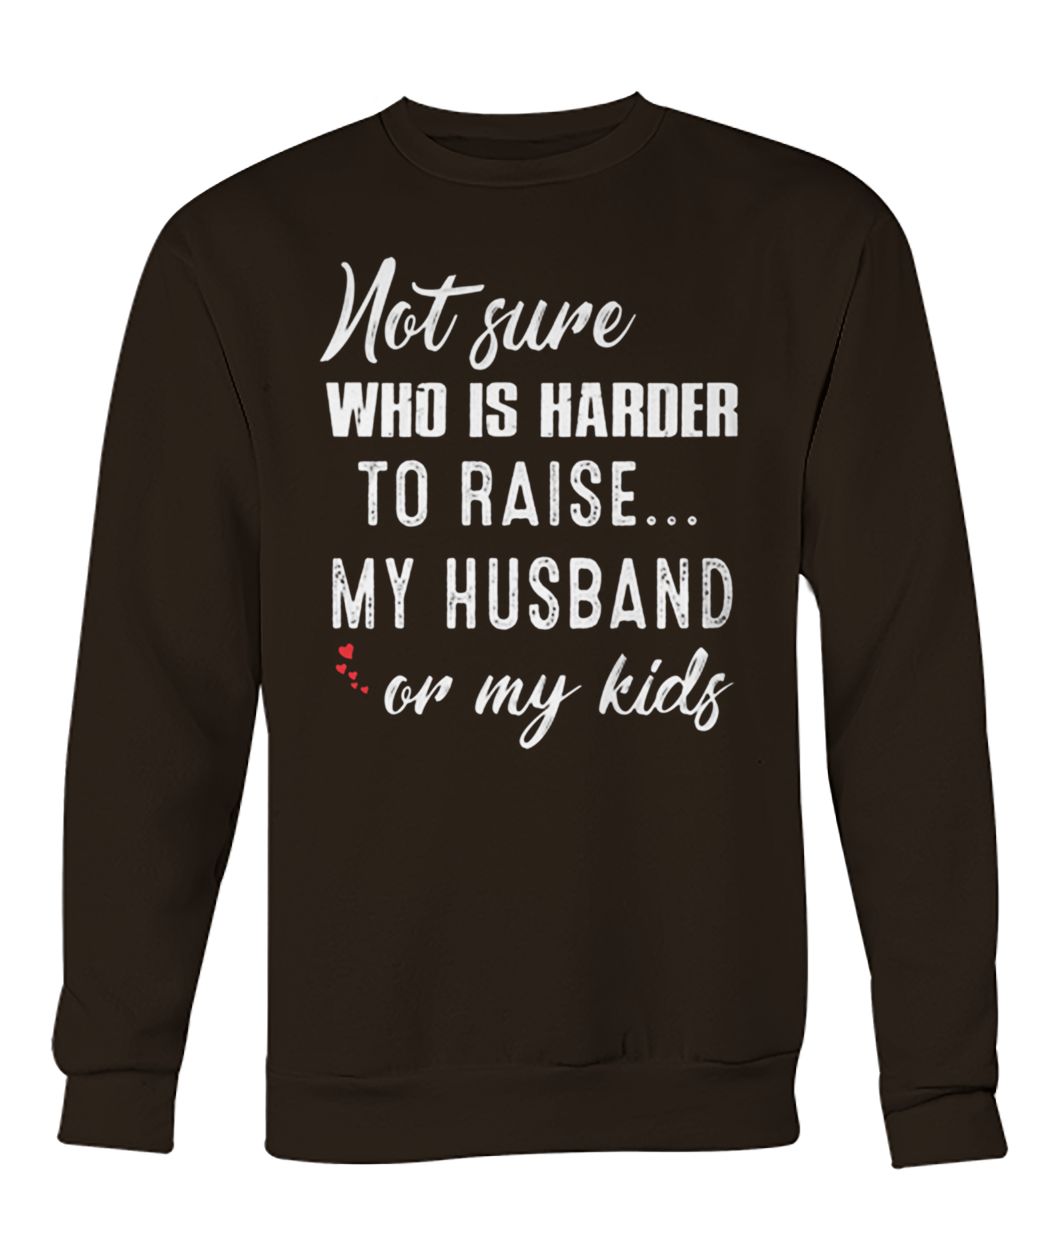 Not sure who is harder to raise my husband or my kids crew neck sweatshirt